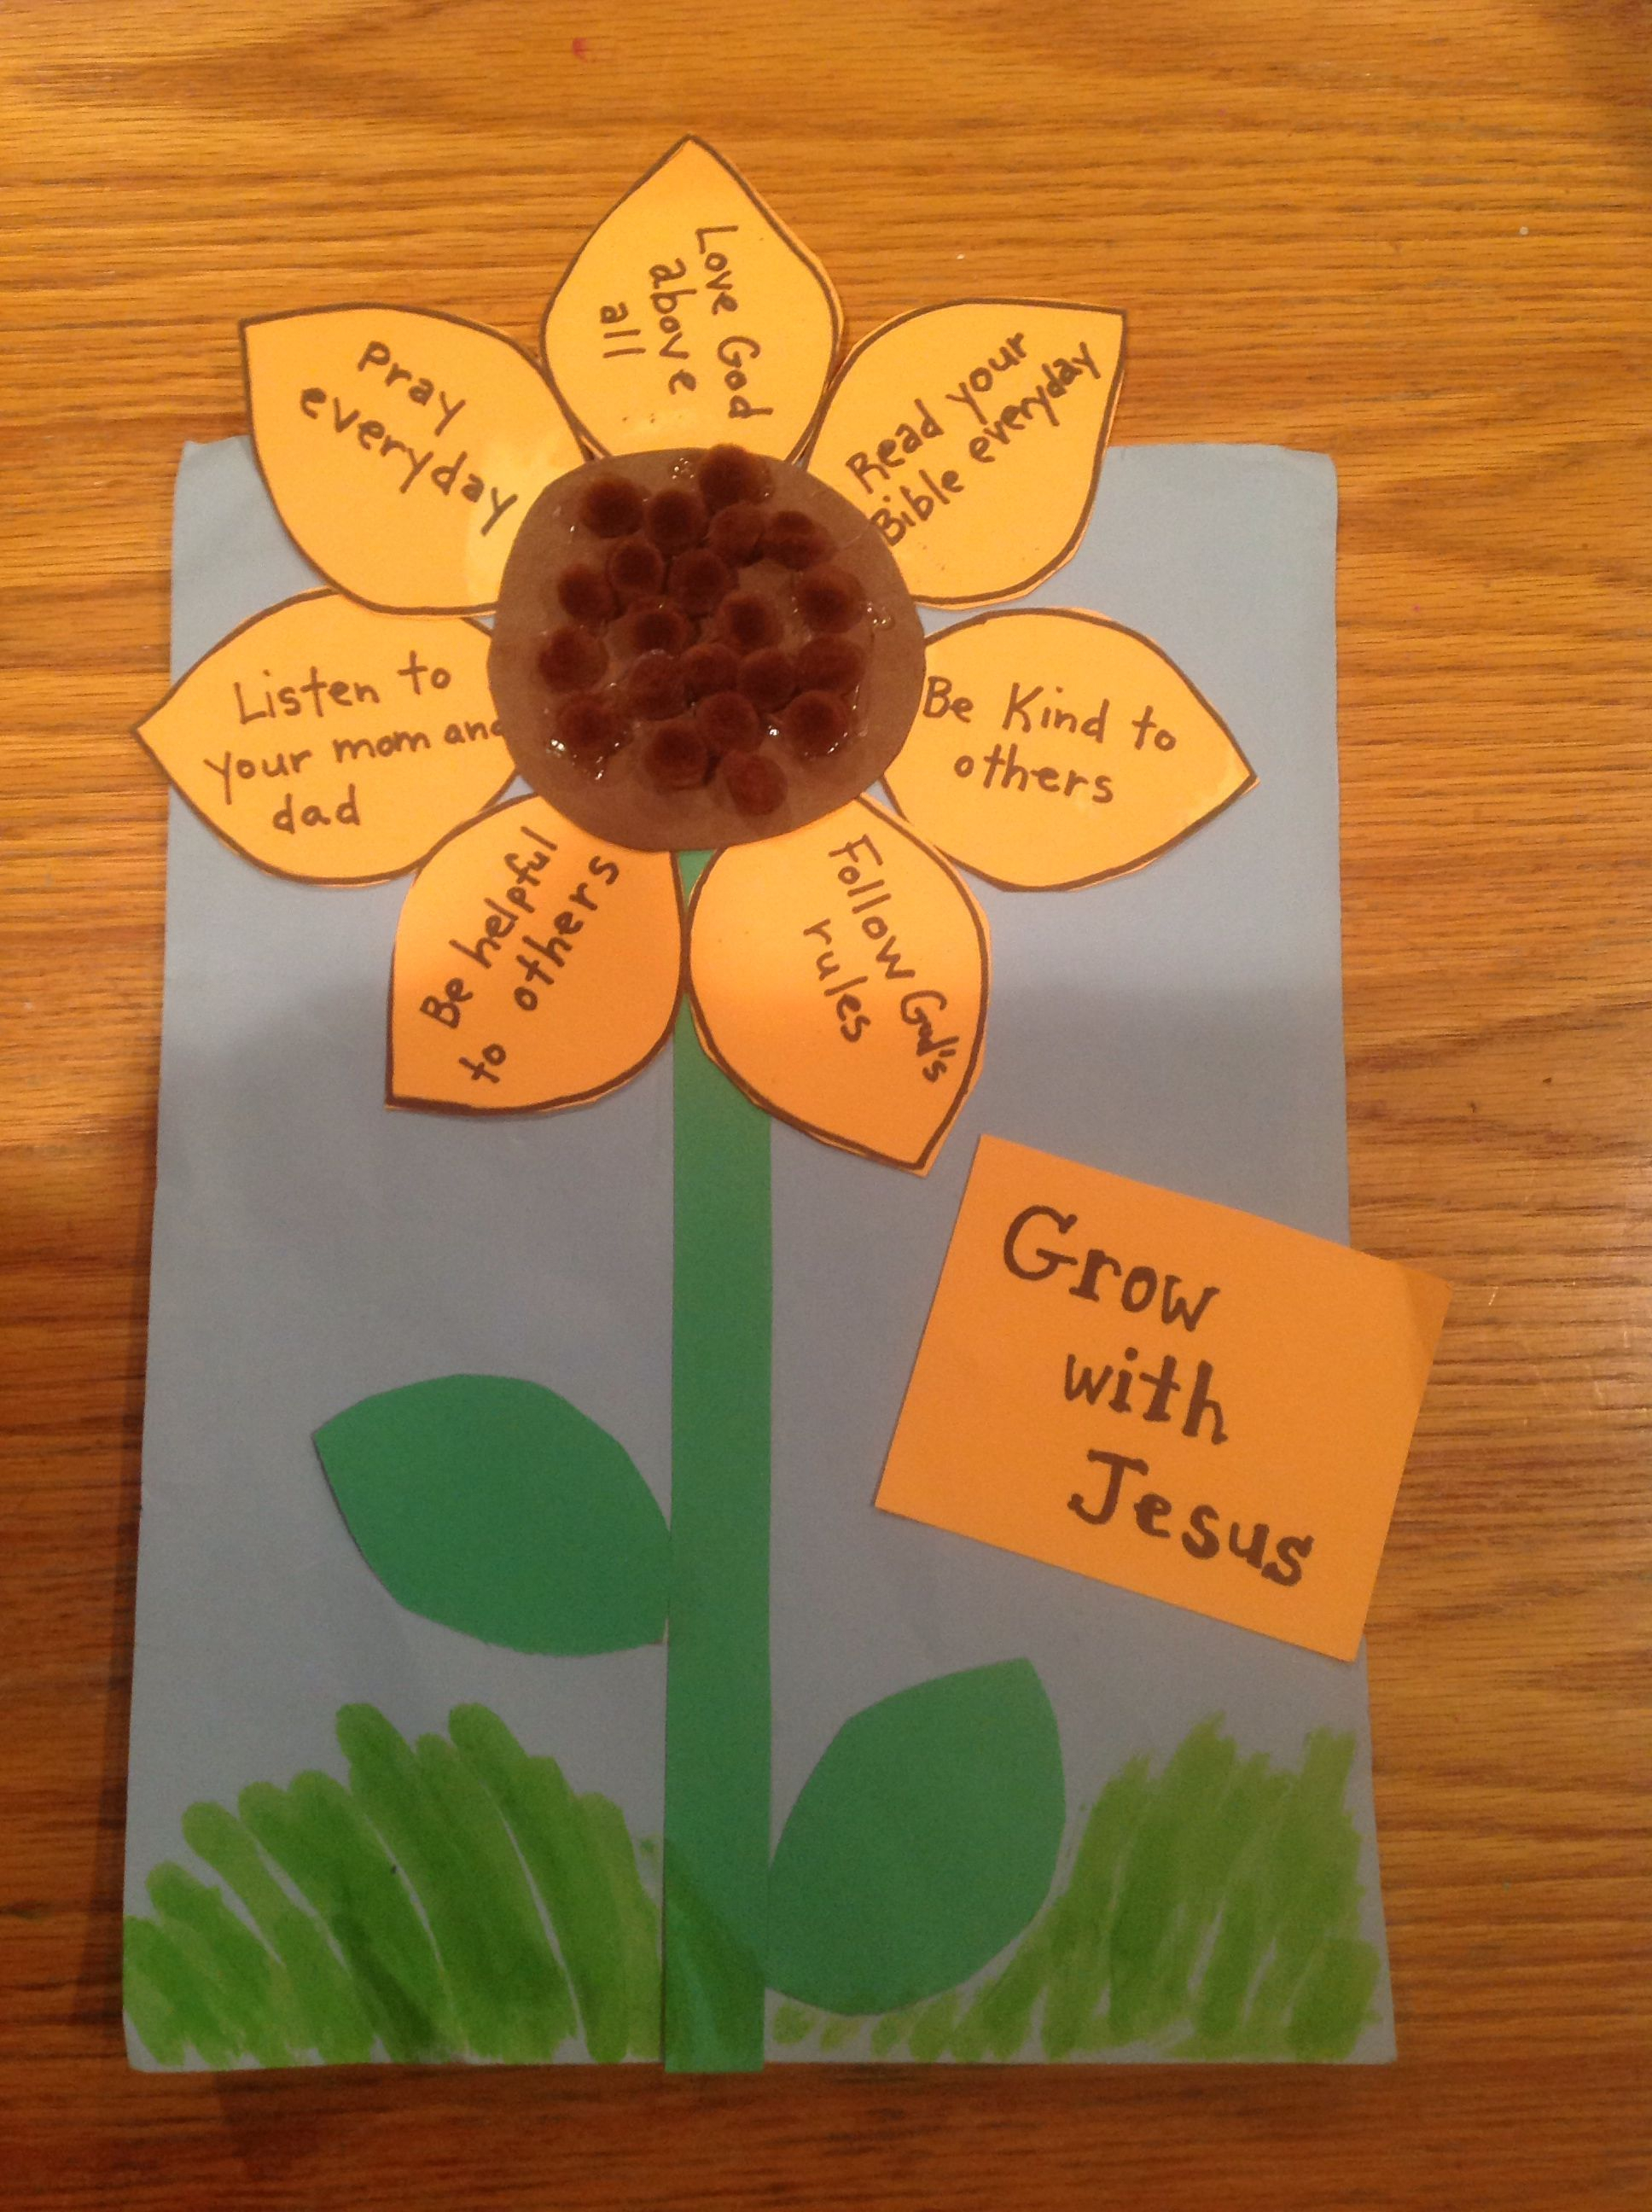 10 Nice Sunday School Ideas For Toddlers grow with jesus bible craftlet bible craftslet sunday 2024